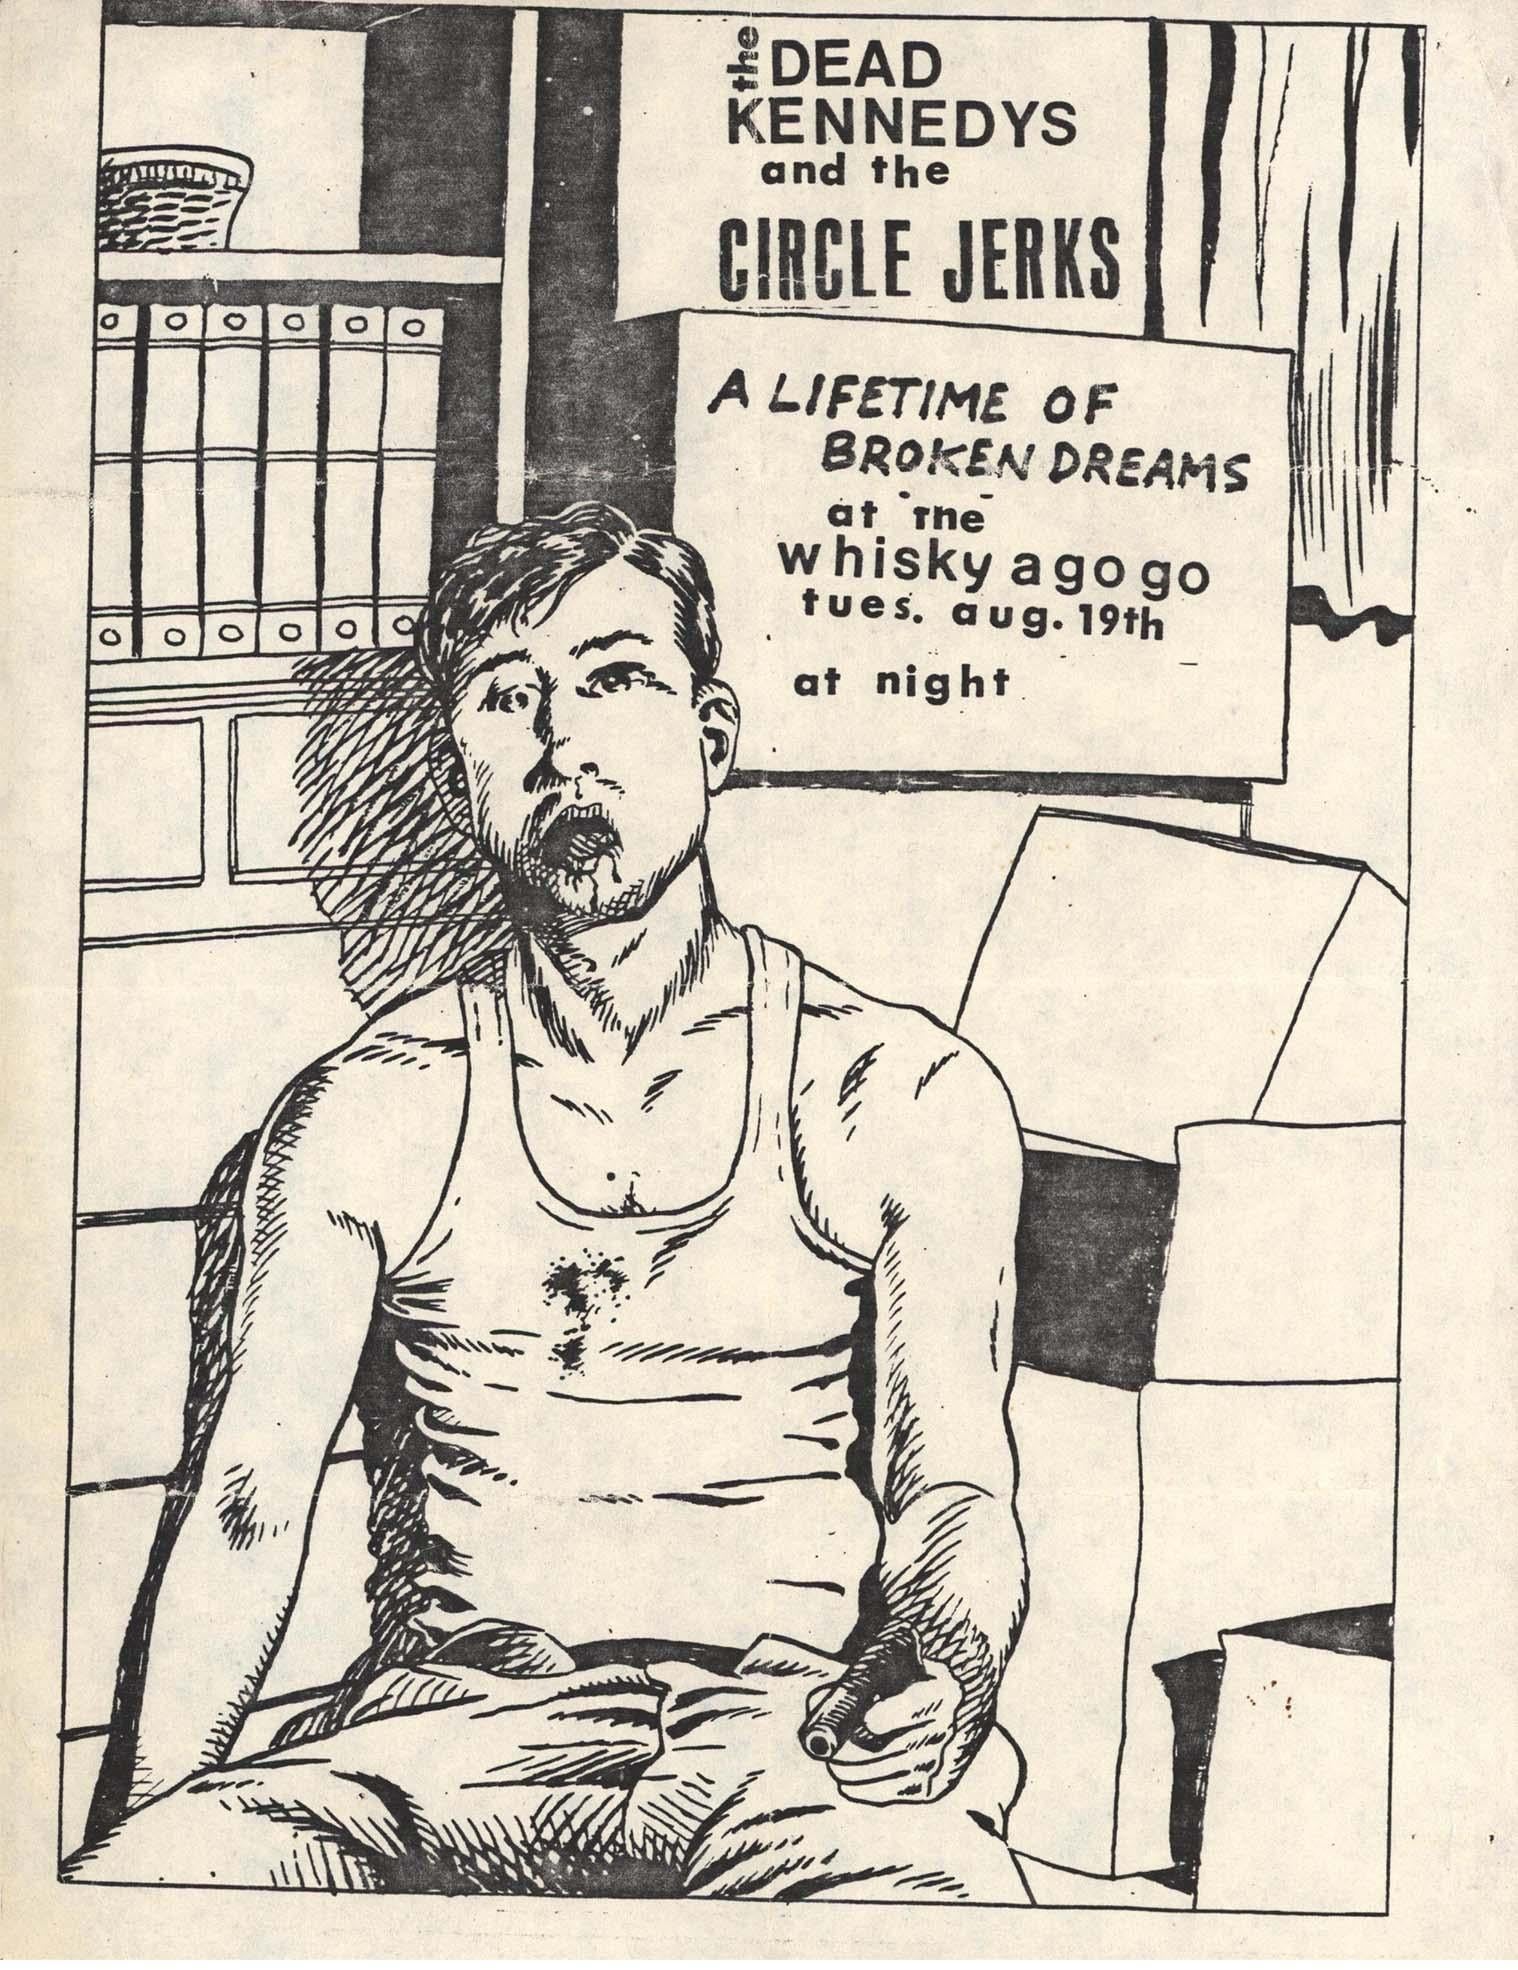 Raymond Pettibon Punk Art 1980:
Rare early Raymond Pettibon illustrated punk flyer published on the occasion of:
The Dead Kennedys & Circle Jerks at The Whisky A Go Go: August, 1980.

Offset Printed punk flyer; 8.5 x 11 inches.

Condition: moderate